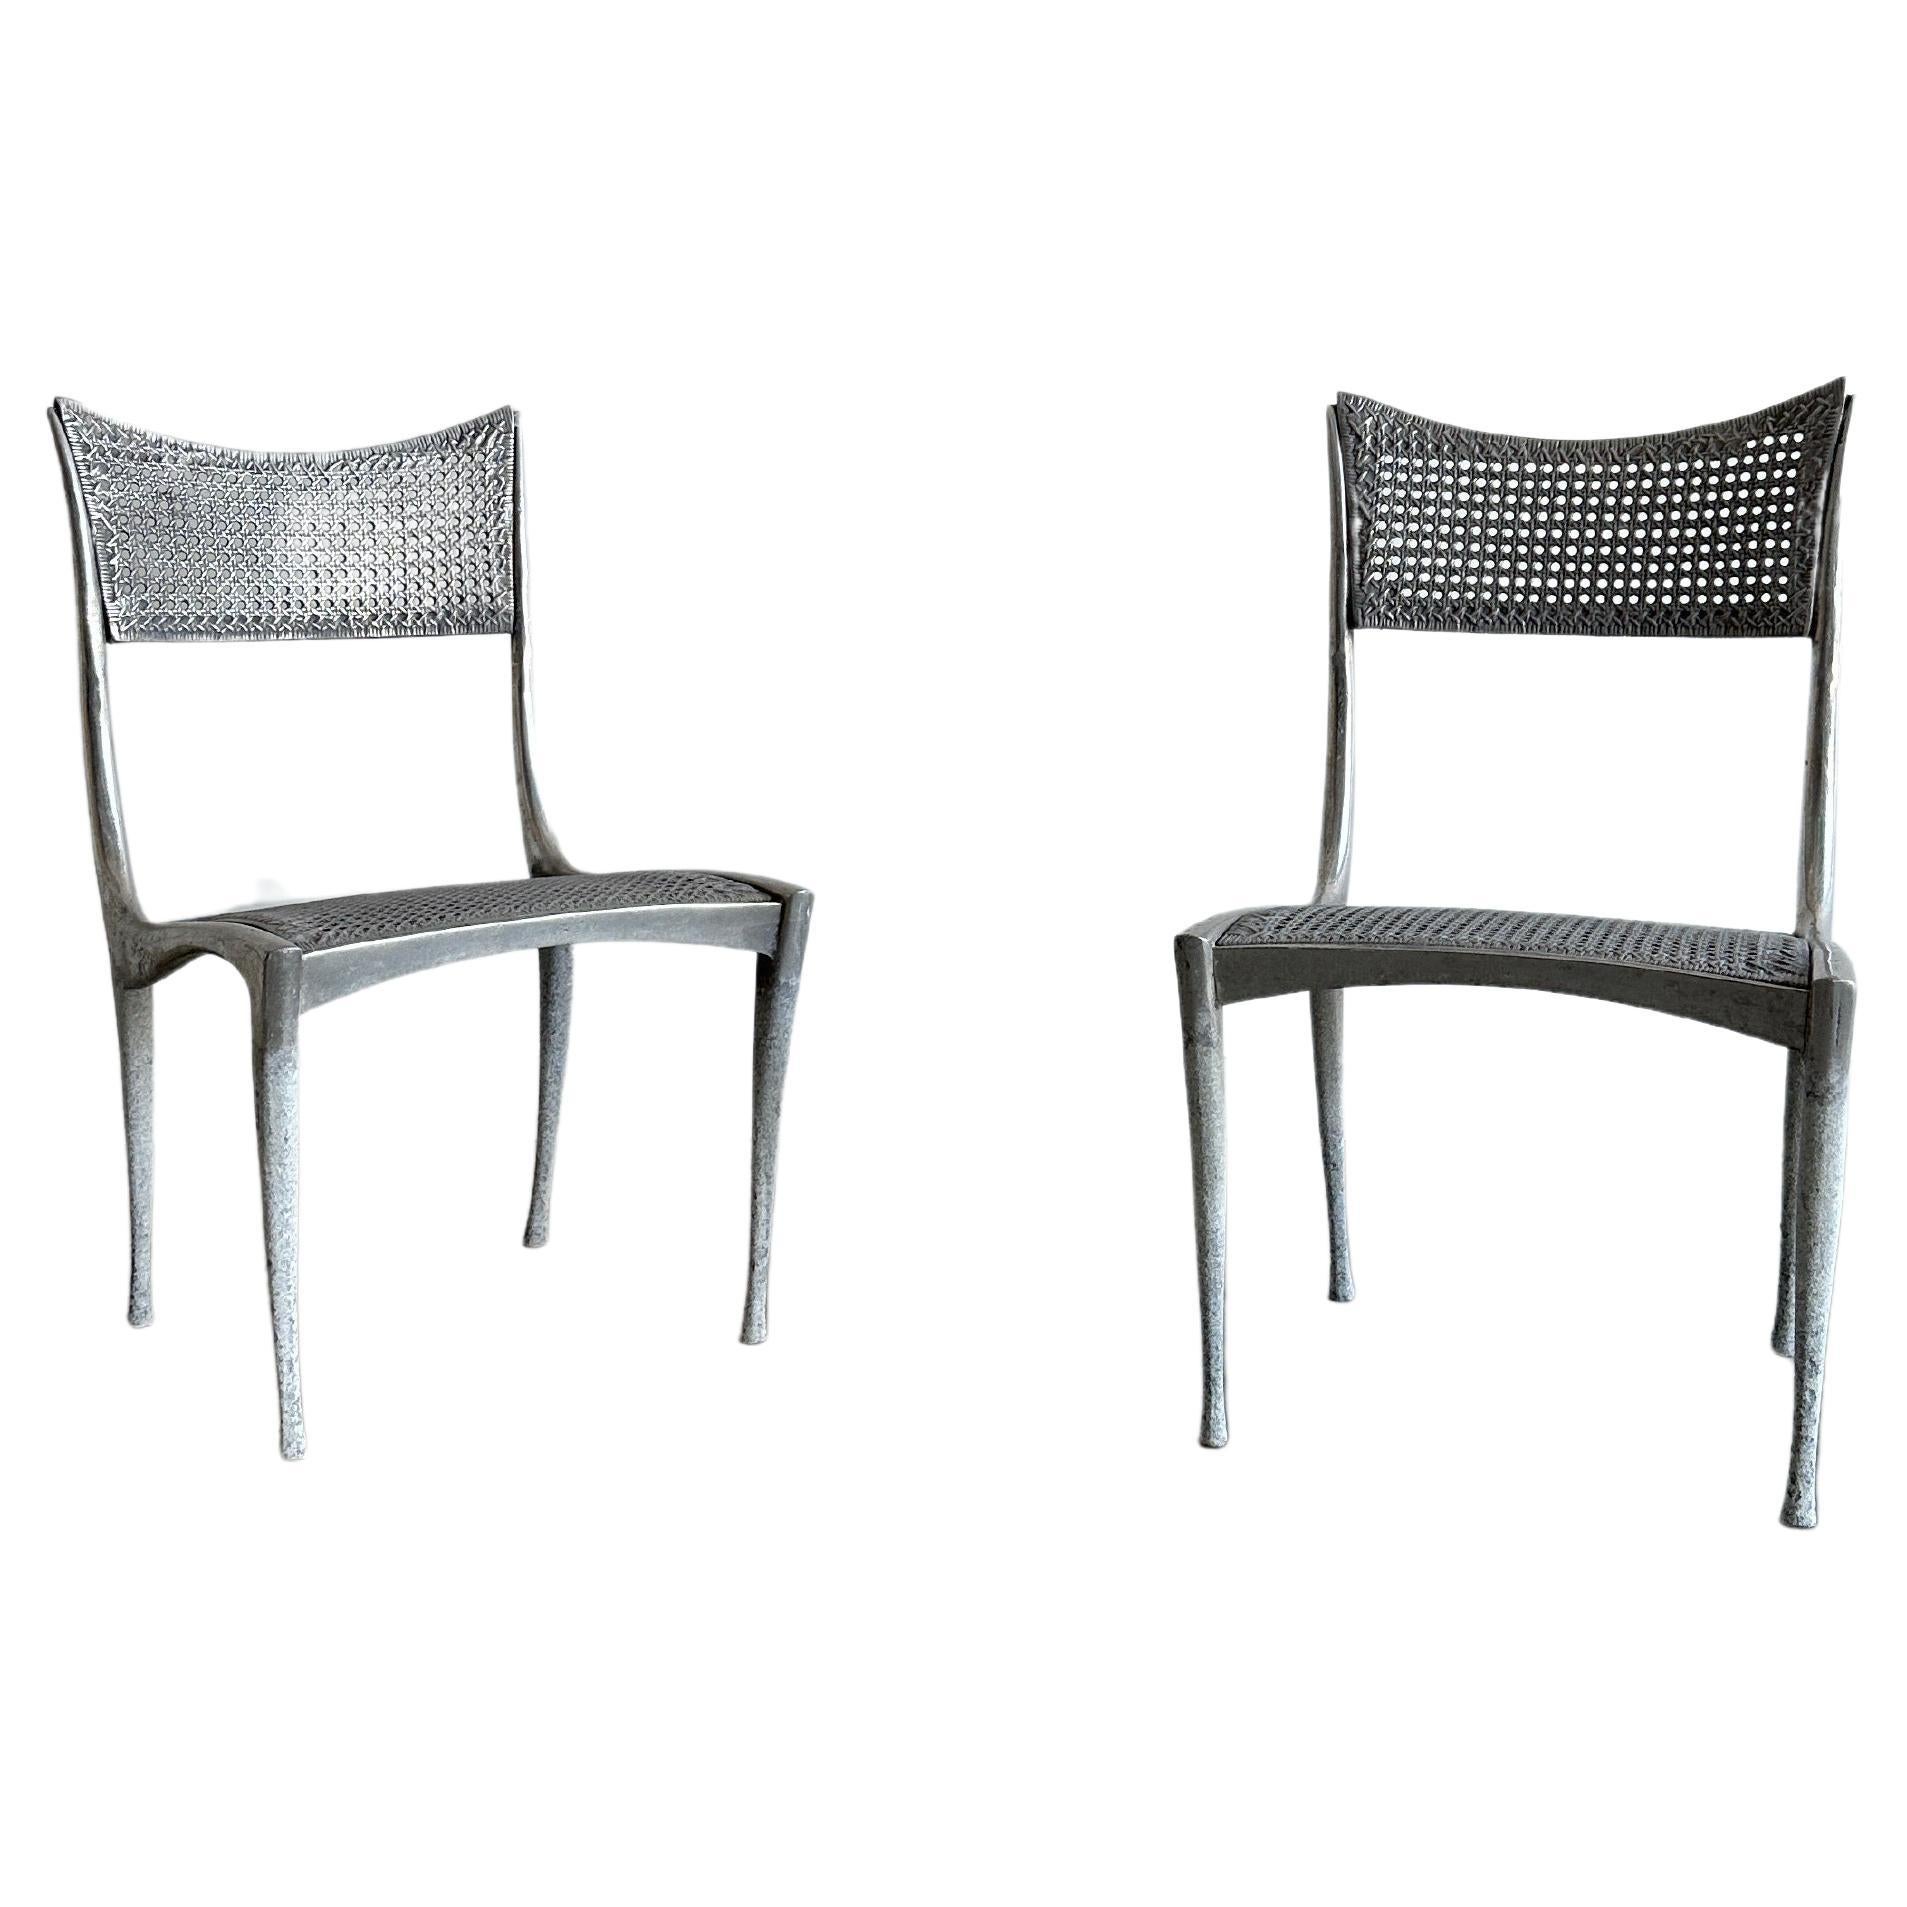 Pair of Gazelle 10B chairs in all cast aluminium by Dan Johnson For Sale